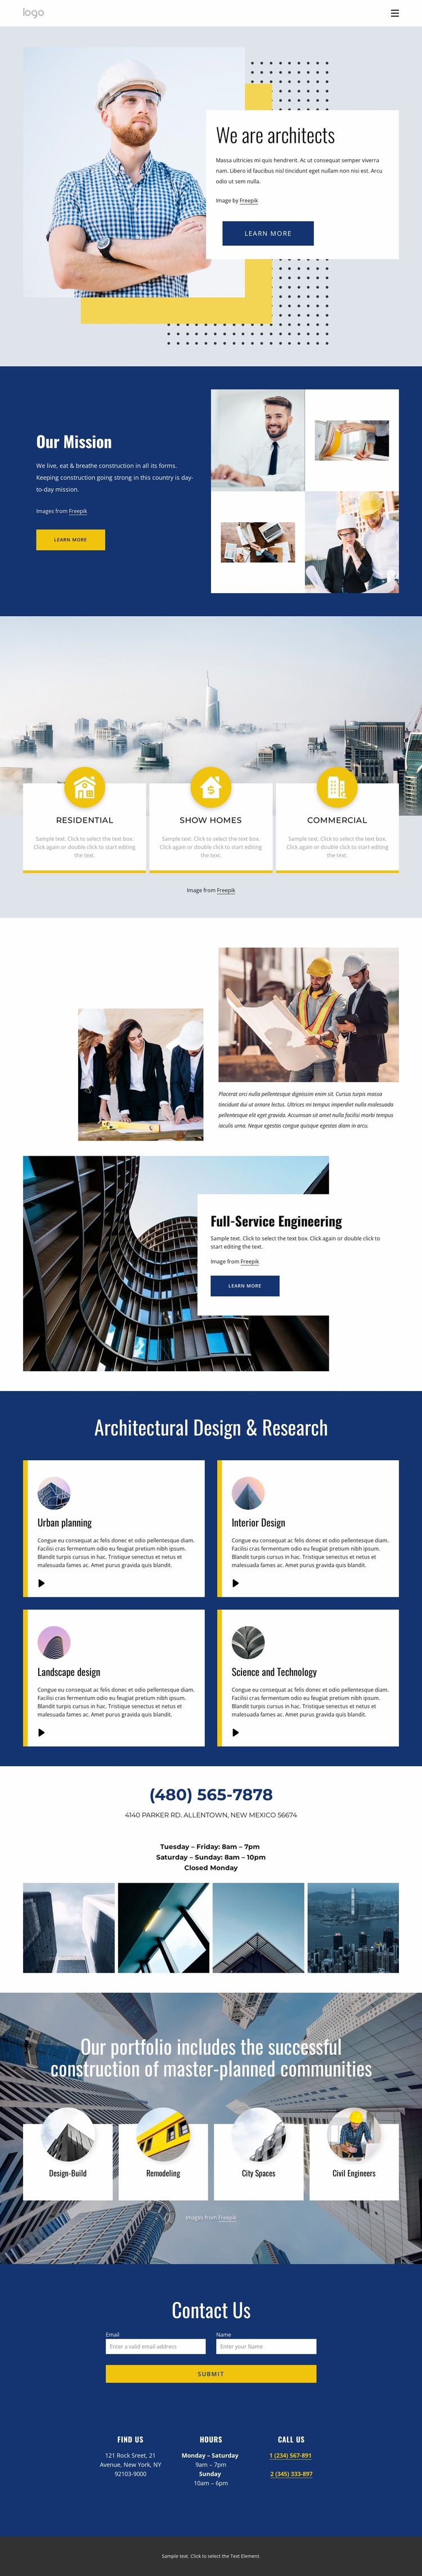 Architectural projects Website Mockup